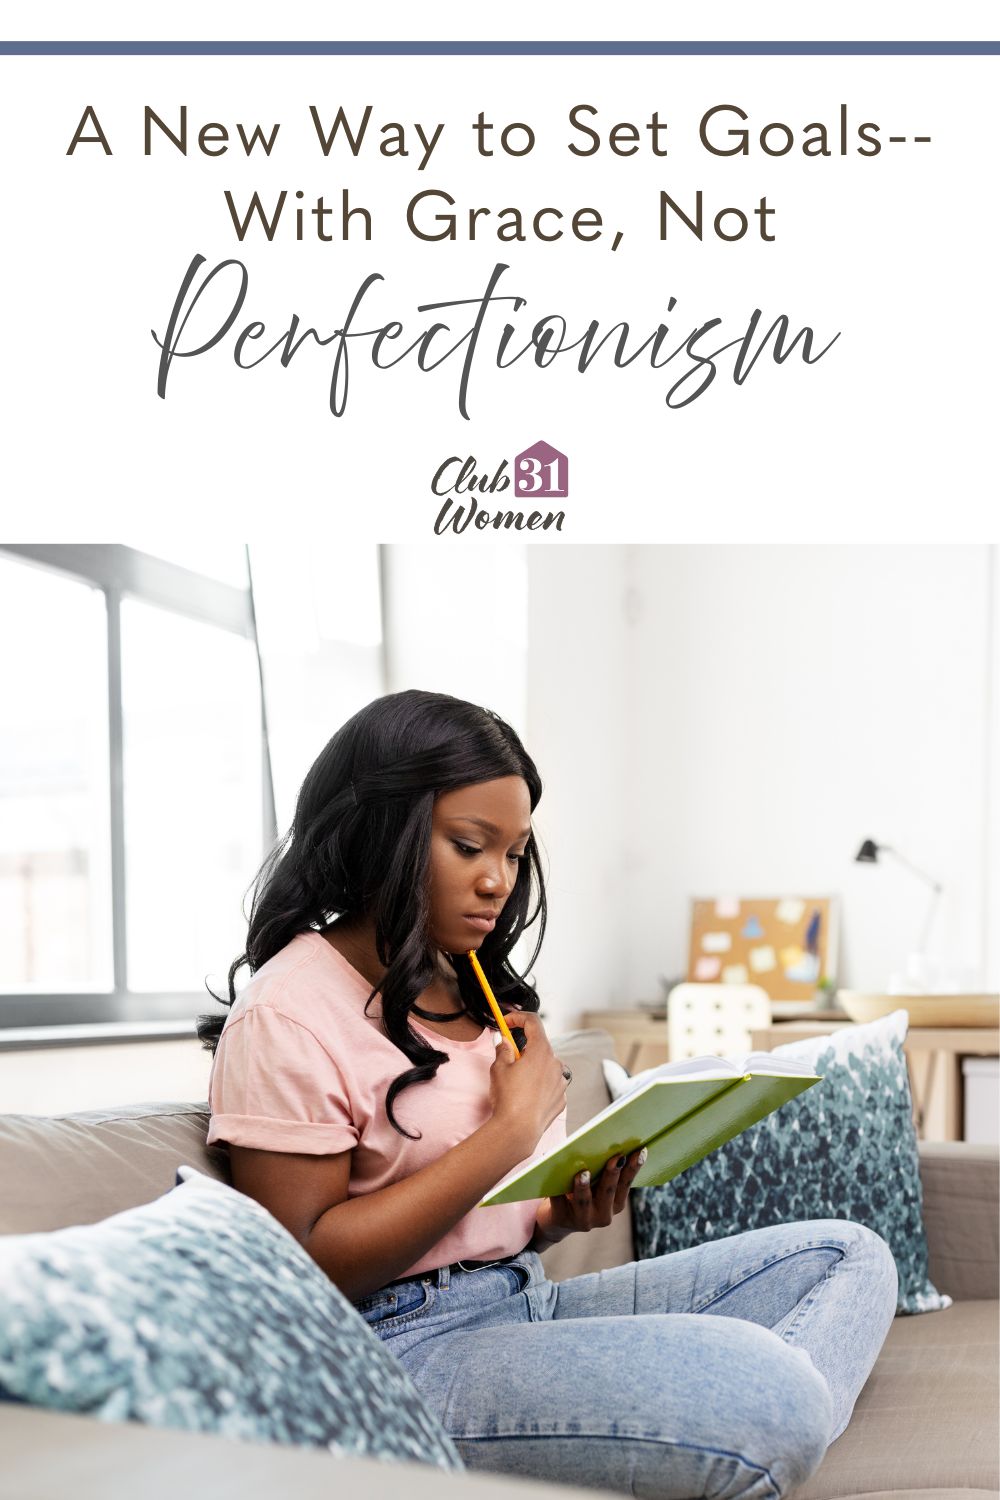 It's not too late to set goals, no matter what part of the year we're in. Think progress not perfection. Here are some ideas... via @Club31Women